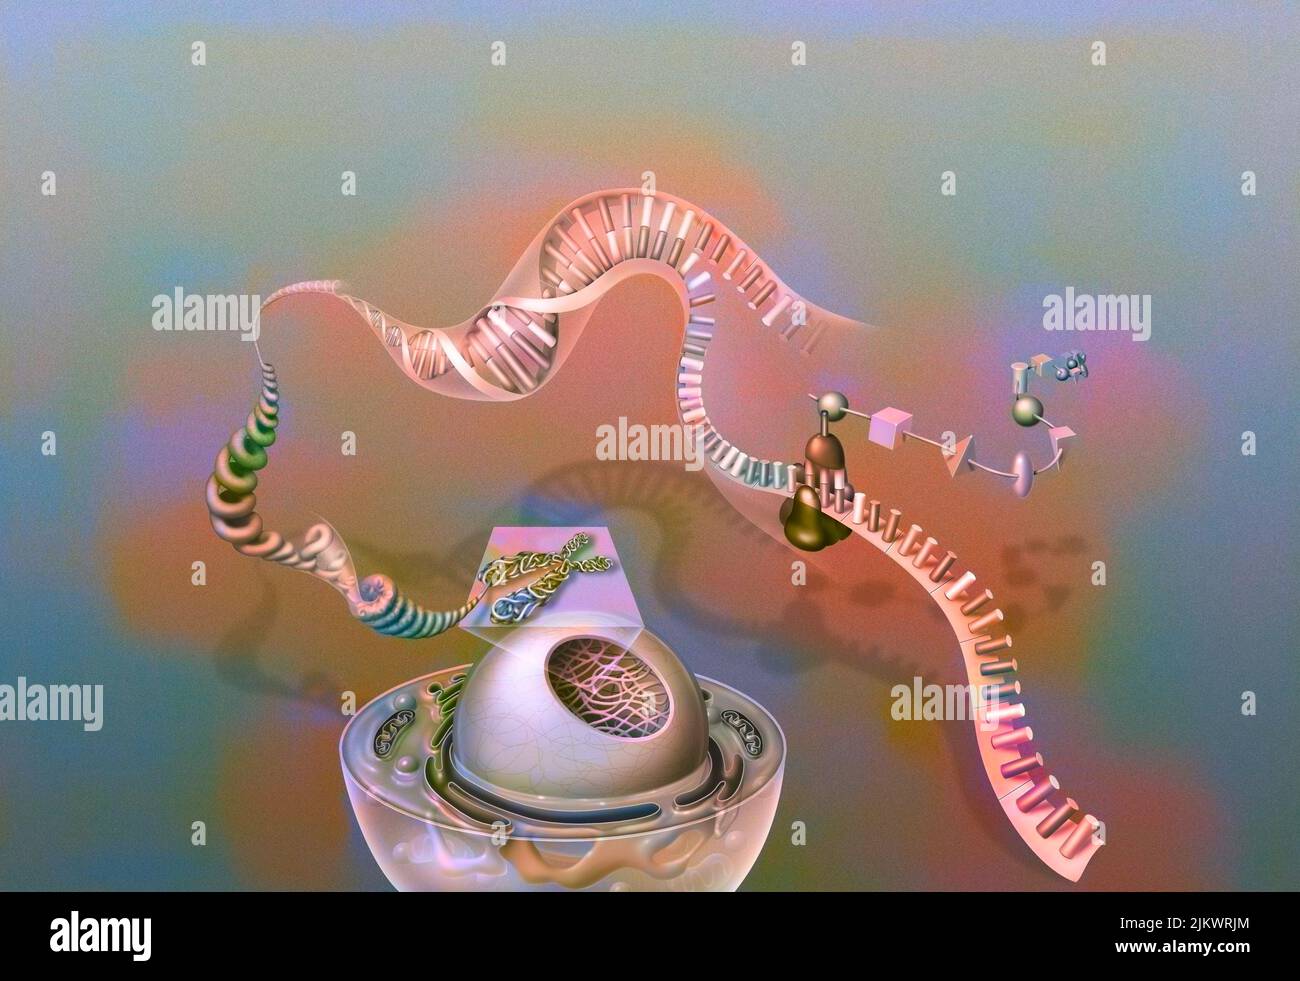 Genes: nucleus of a cell with chromosome, chromatin, DNA helix, genes, ribosome, proteins. Stock Photo